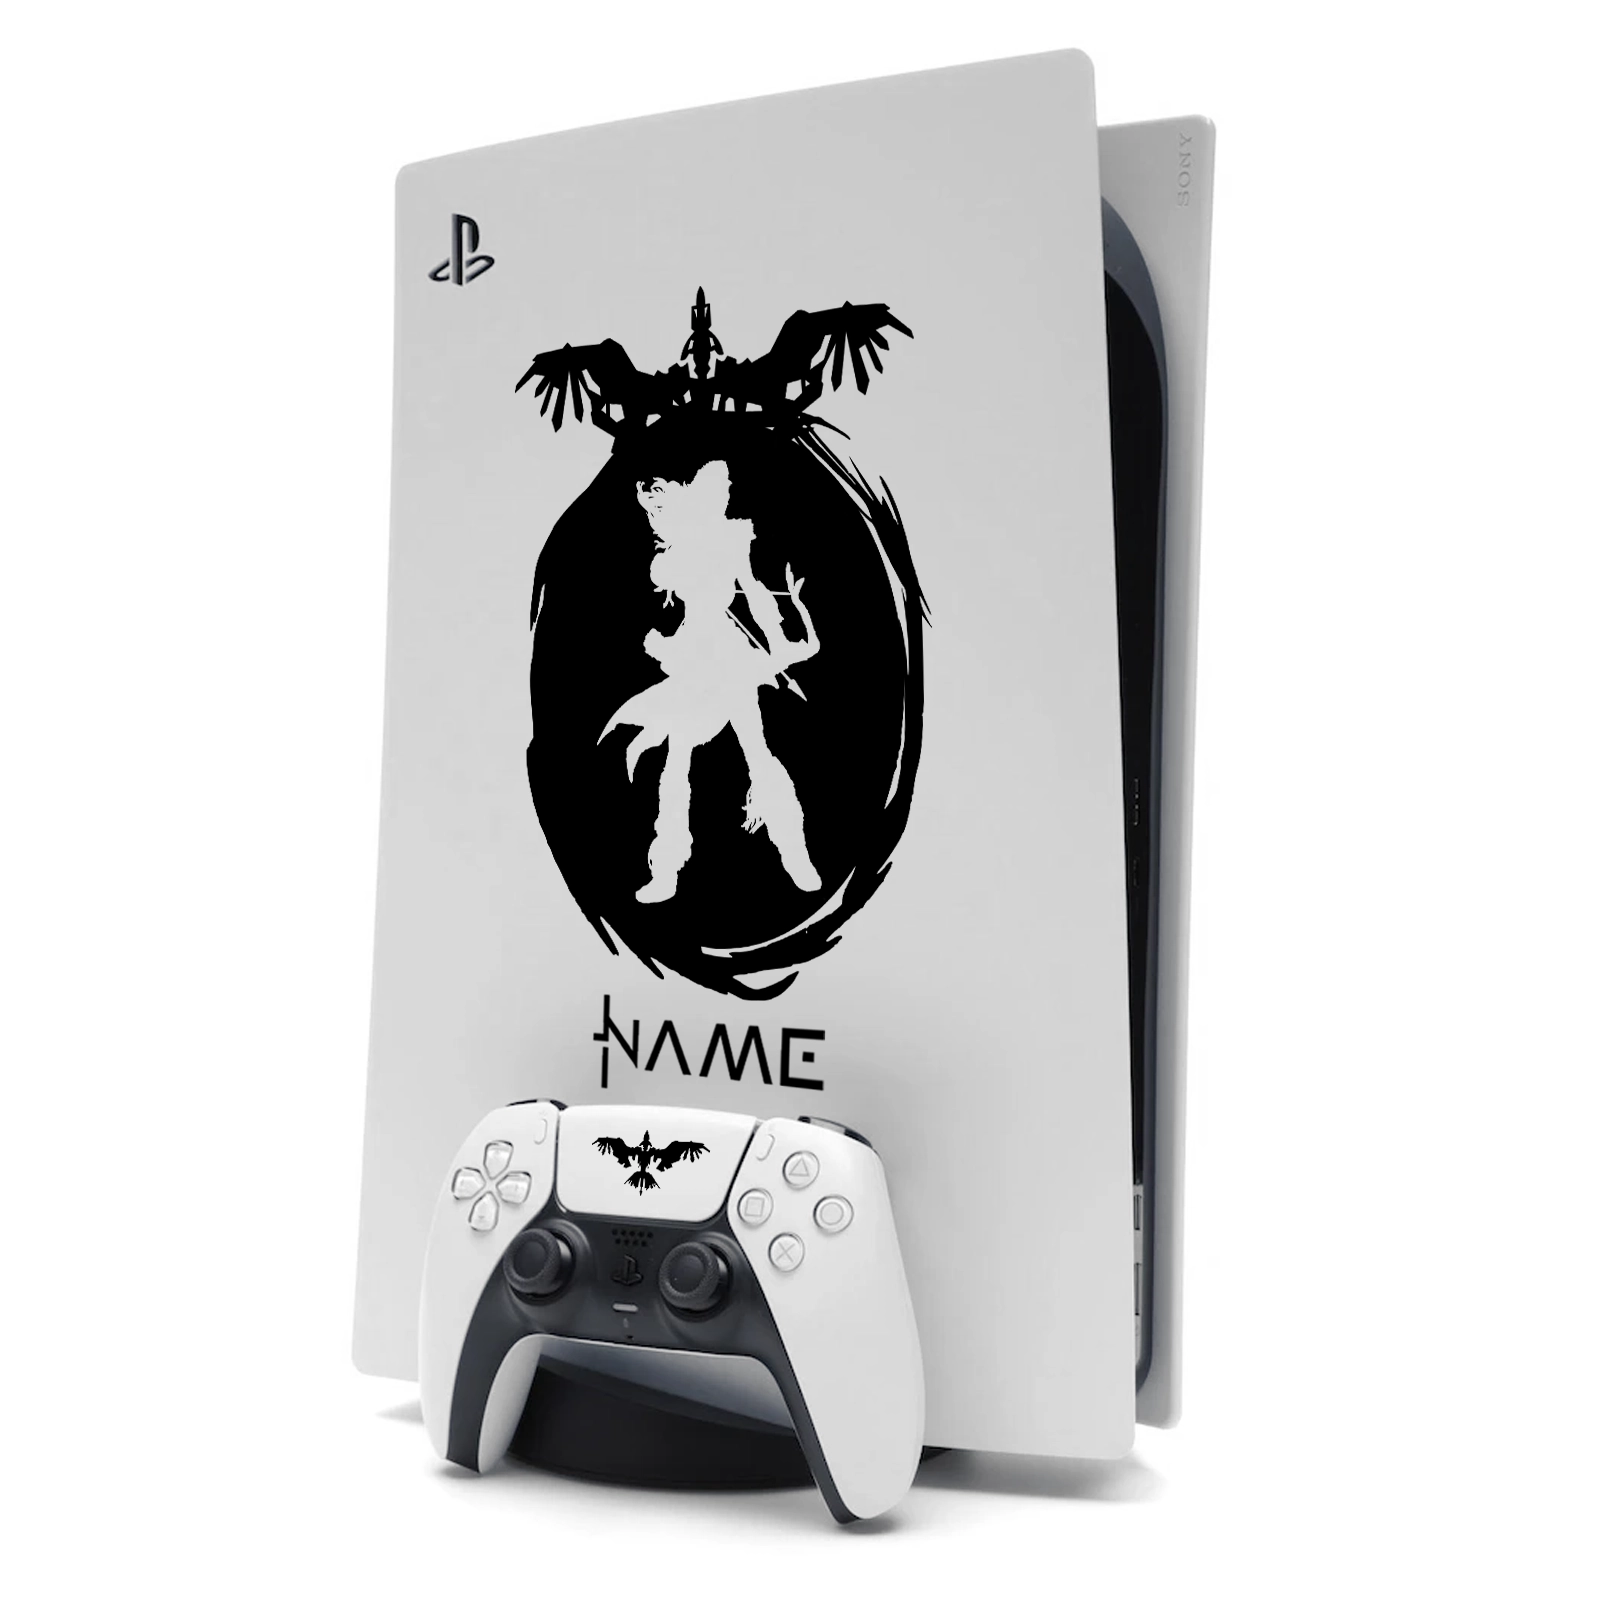 Horizon Aloy PS5 Sticker Skin for Playstation 5 in Black